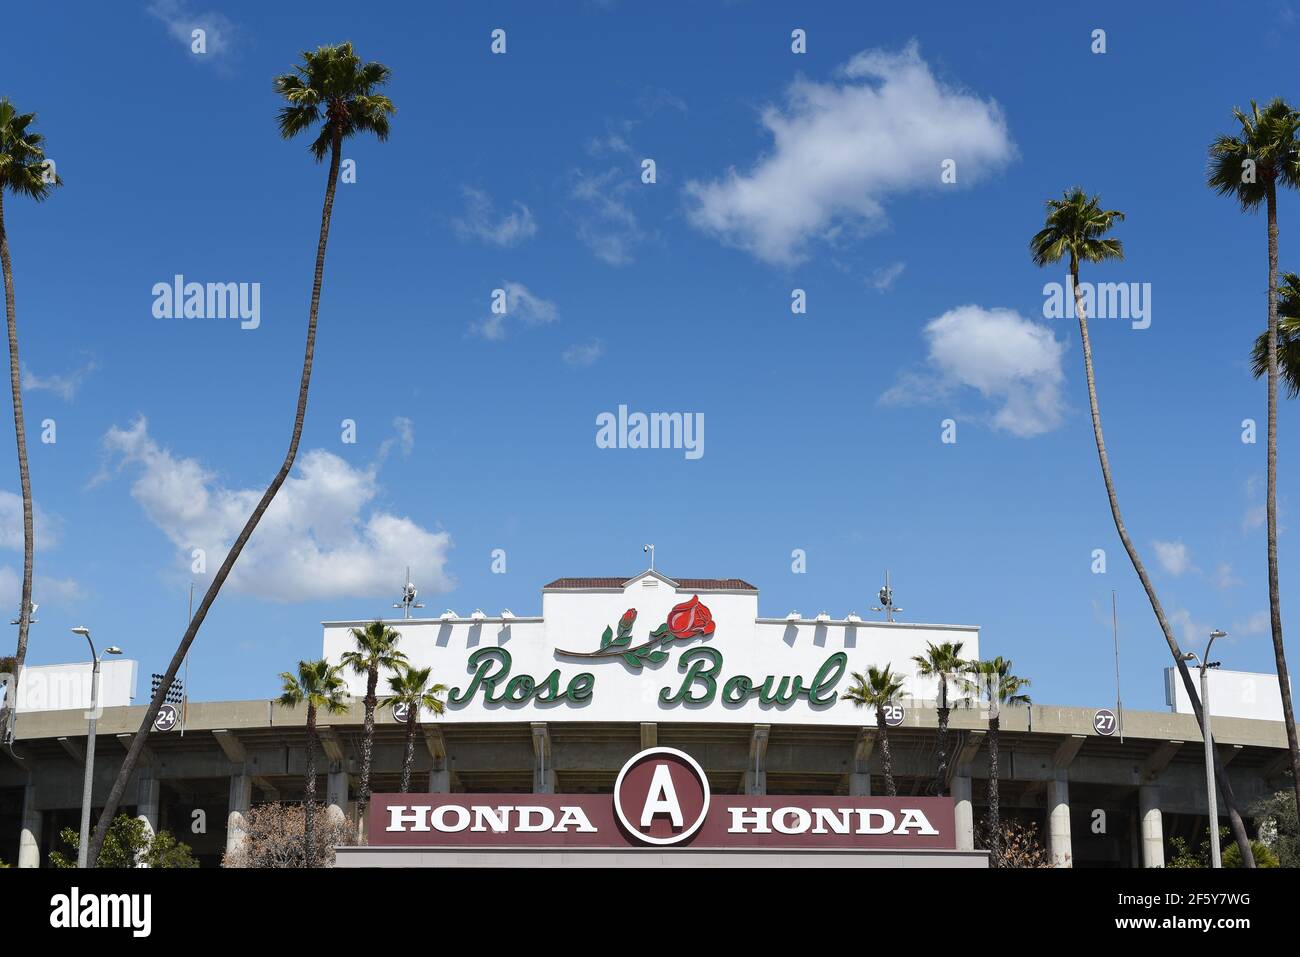 PASADENA, CALIFORNIA - 26 MAR 2021: Closeup of the Rose Bowl sign framed by palm trees and blue cloudy skies. Stock Photo